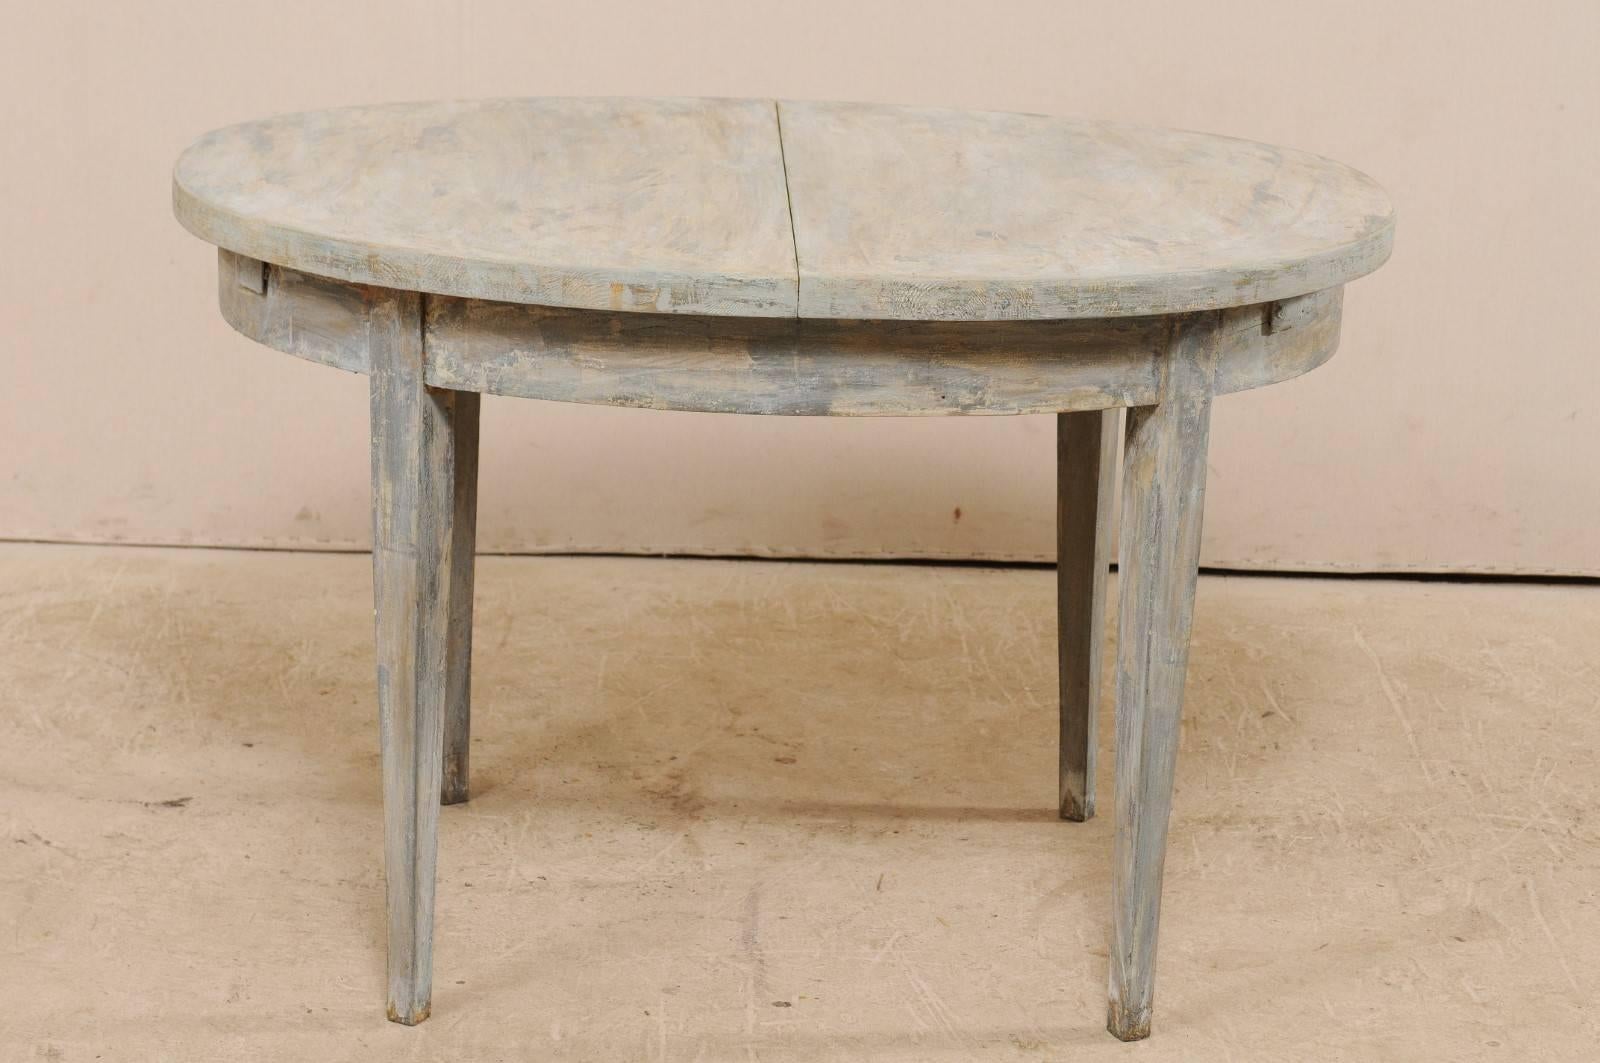 Carved Swedish Midcentury Painted Wood Oval Occasional Table in Soft Blue-Grey